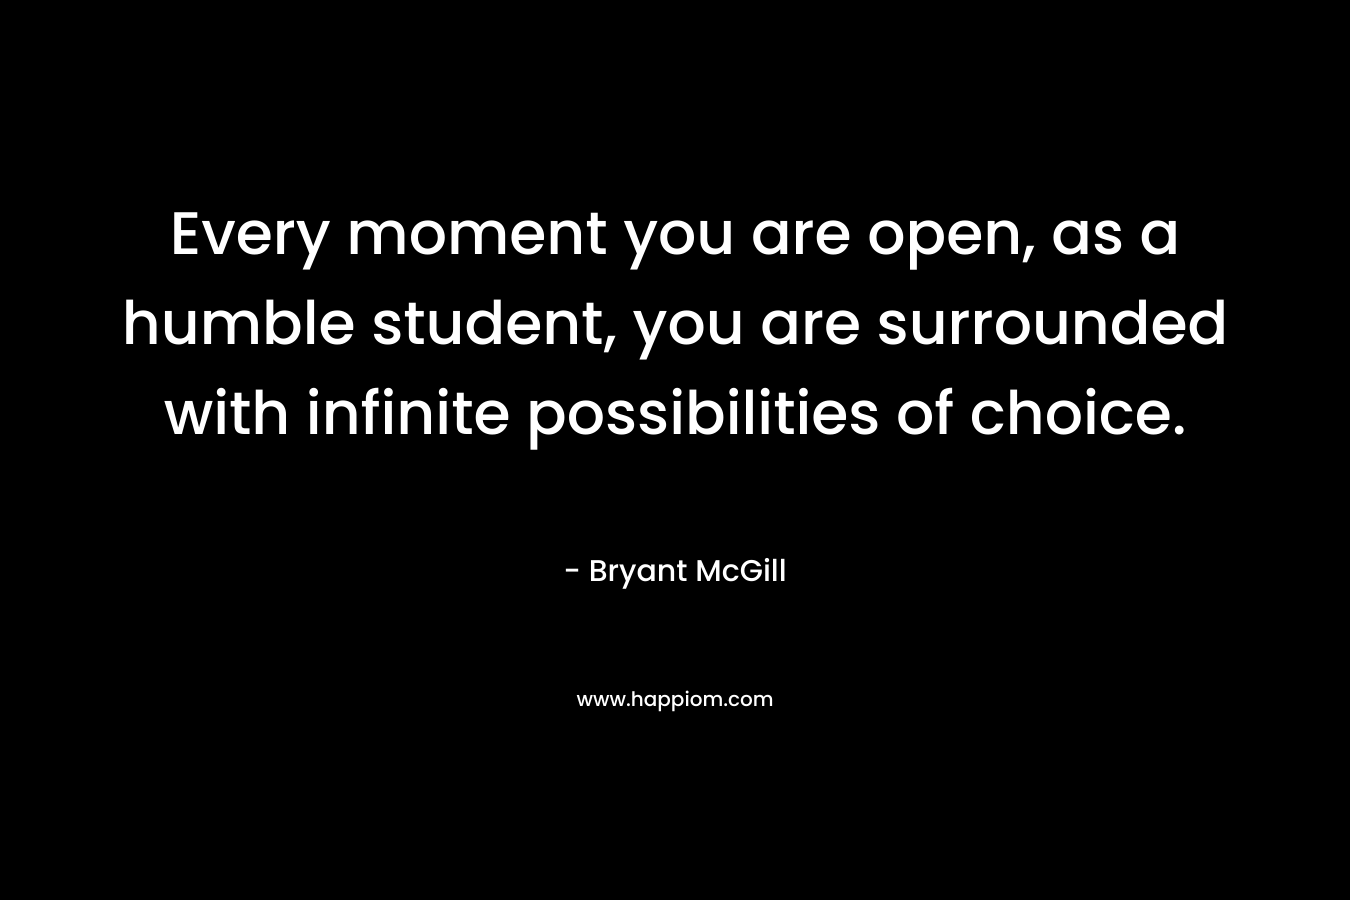 Every moment you are open, as a humble student, you are surrounded with infinite possibilities of choice.